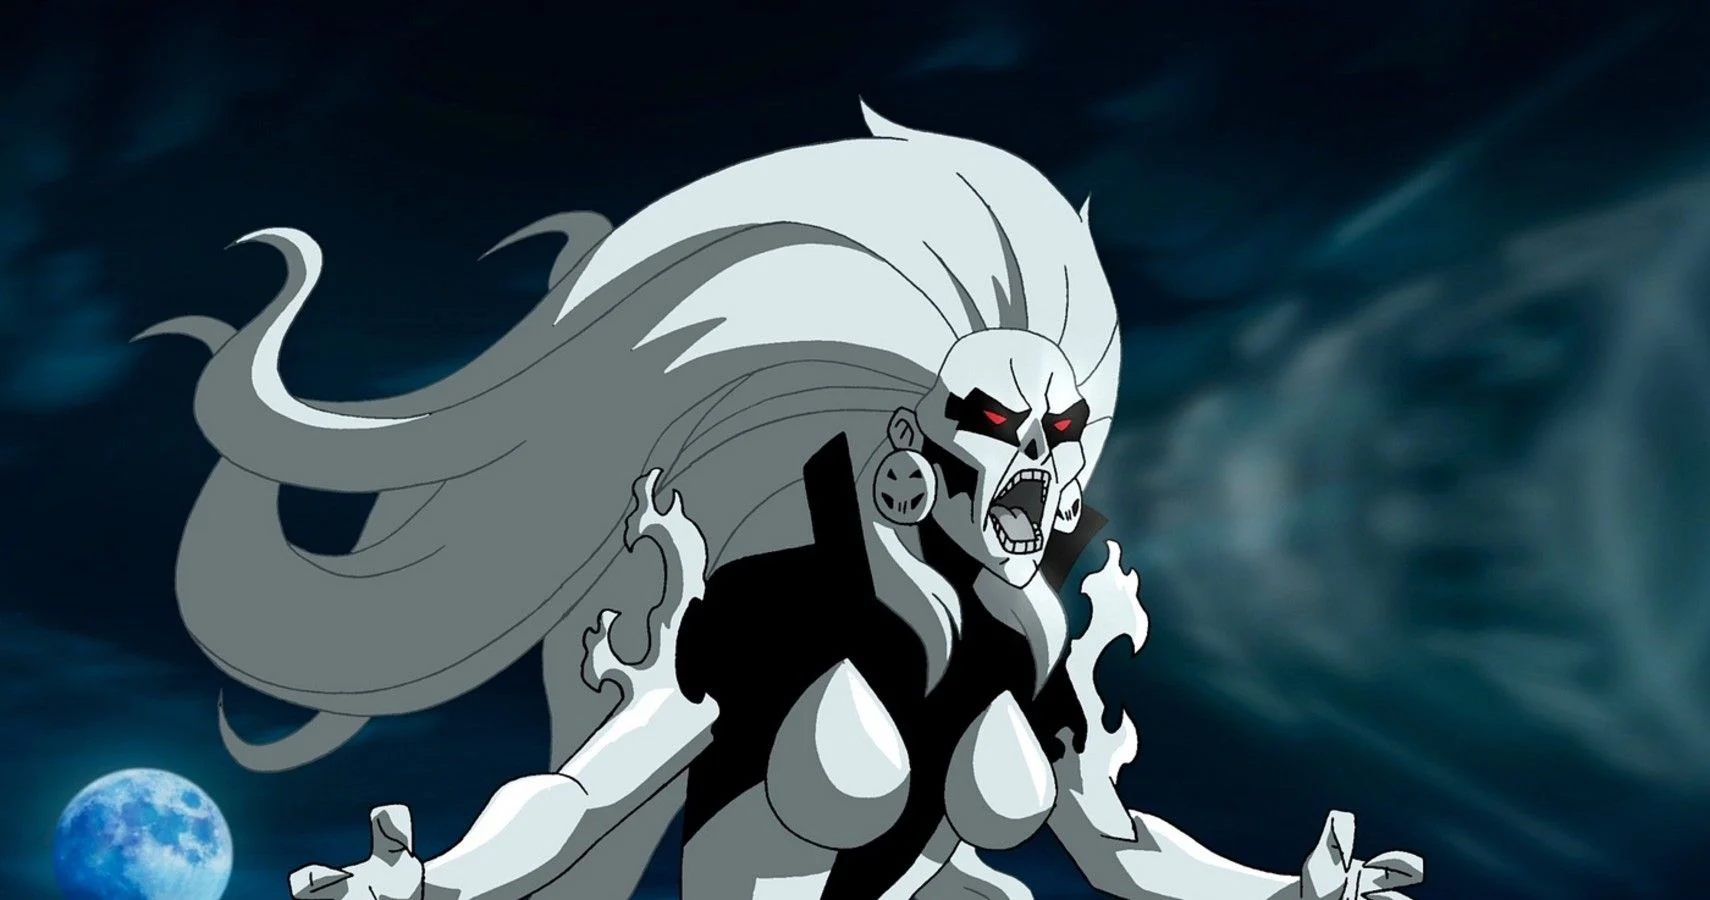 Silver Banshee in the DC Animated universe